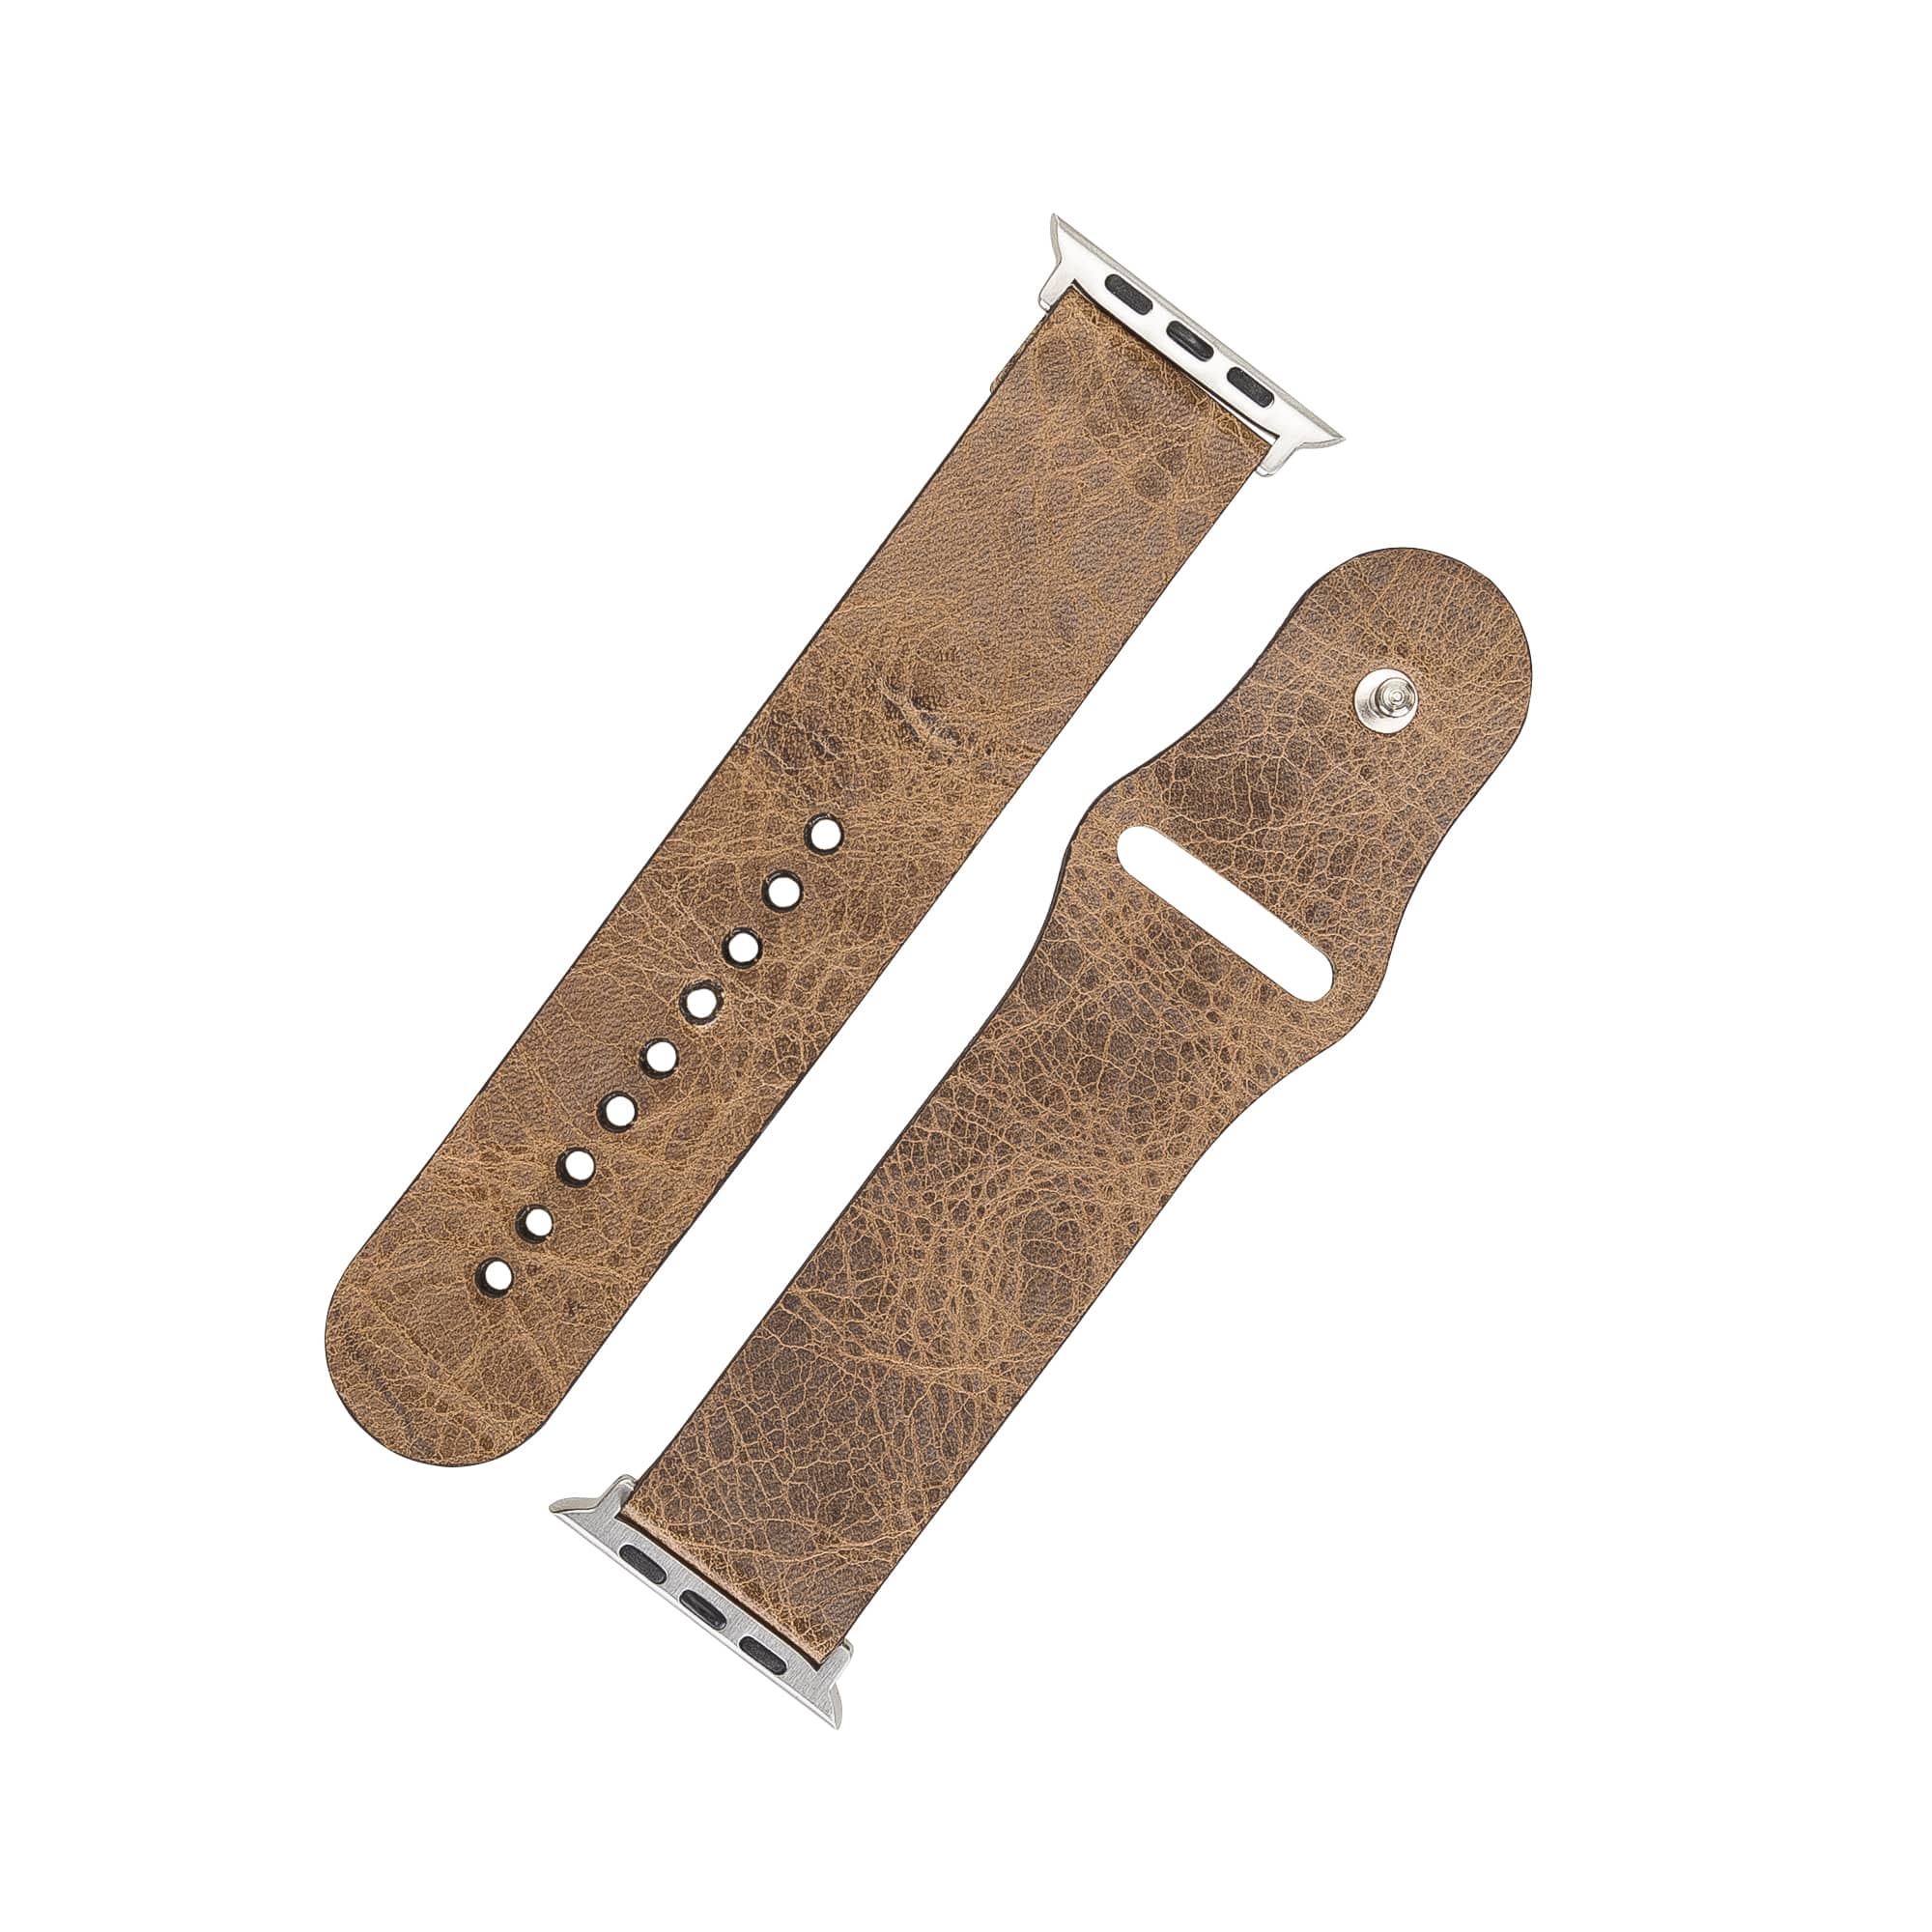  Sutton Classic Brown Genuine Leather Apple Watch Band Strap 38mm 40mm 42mm 44mm 45mm for All Series - Bomonti - 3